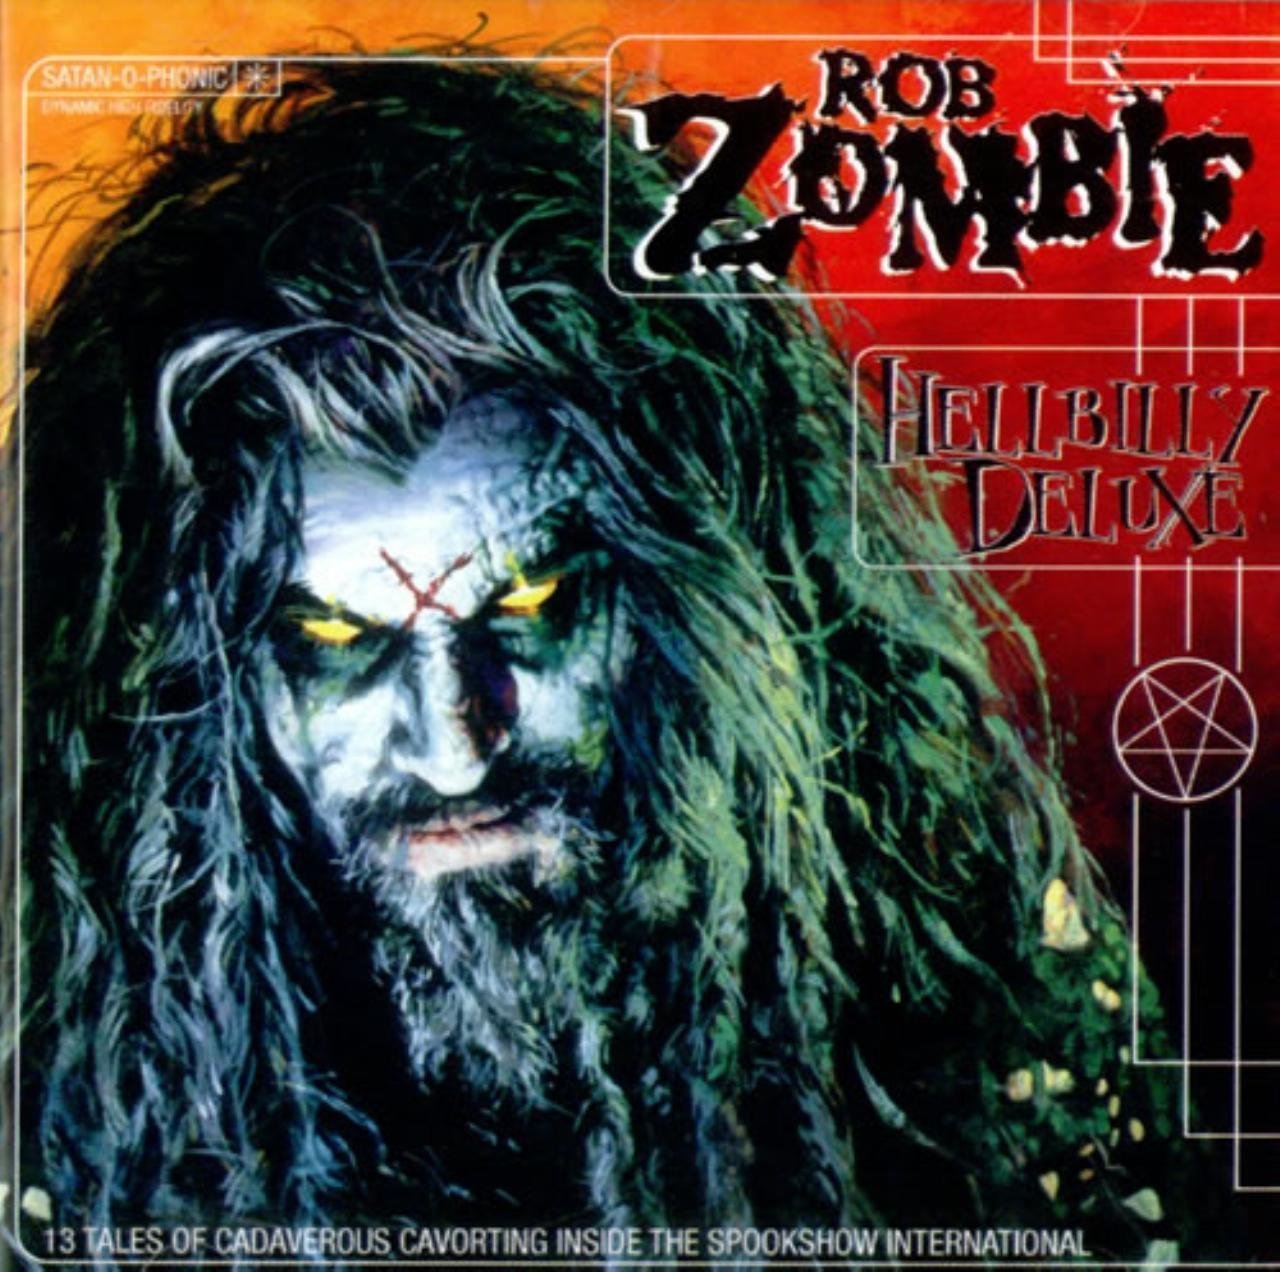 CD Shop - ZOMBIE, ROB HELLBILLY DELUXE